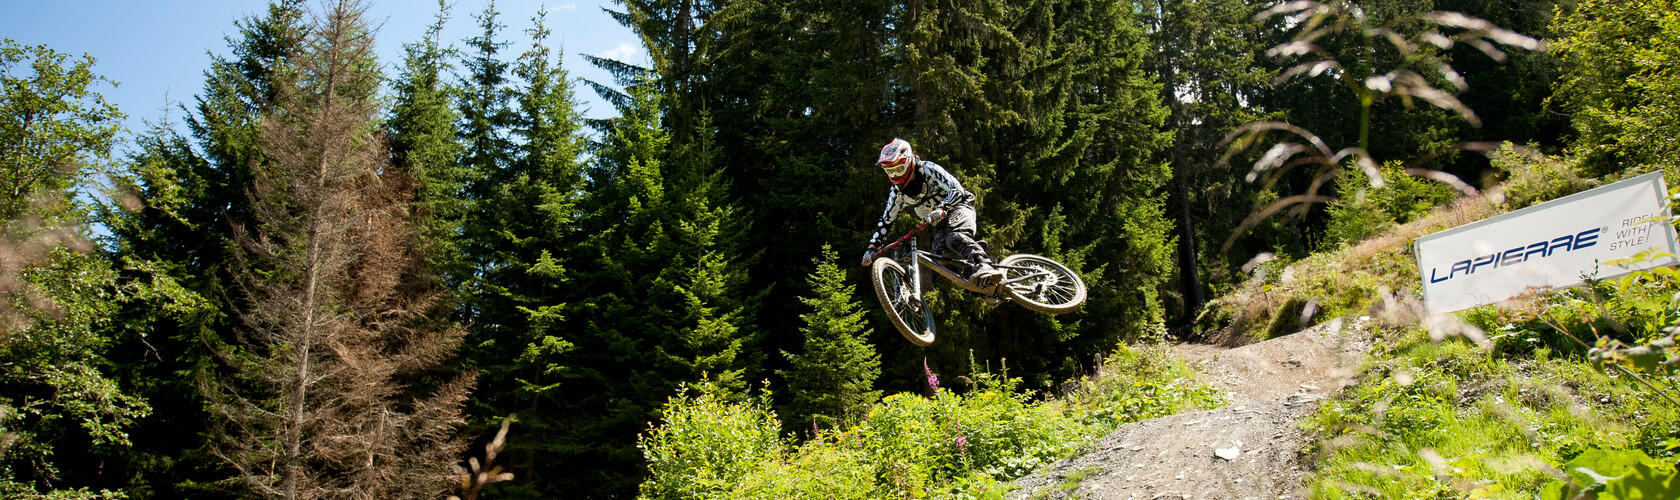 Show your skills at the Bikepark Planai! | © Stefan Voitl